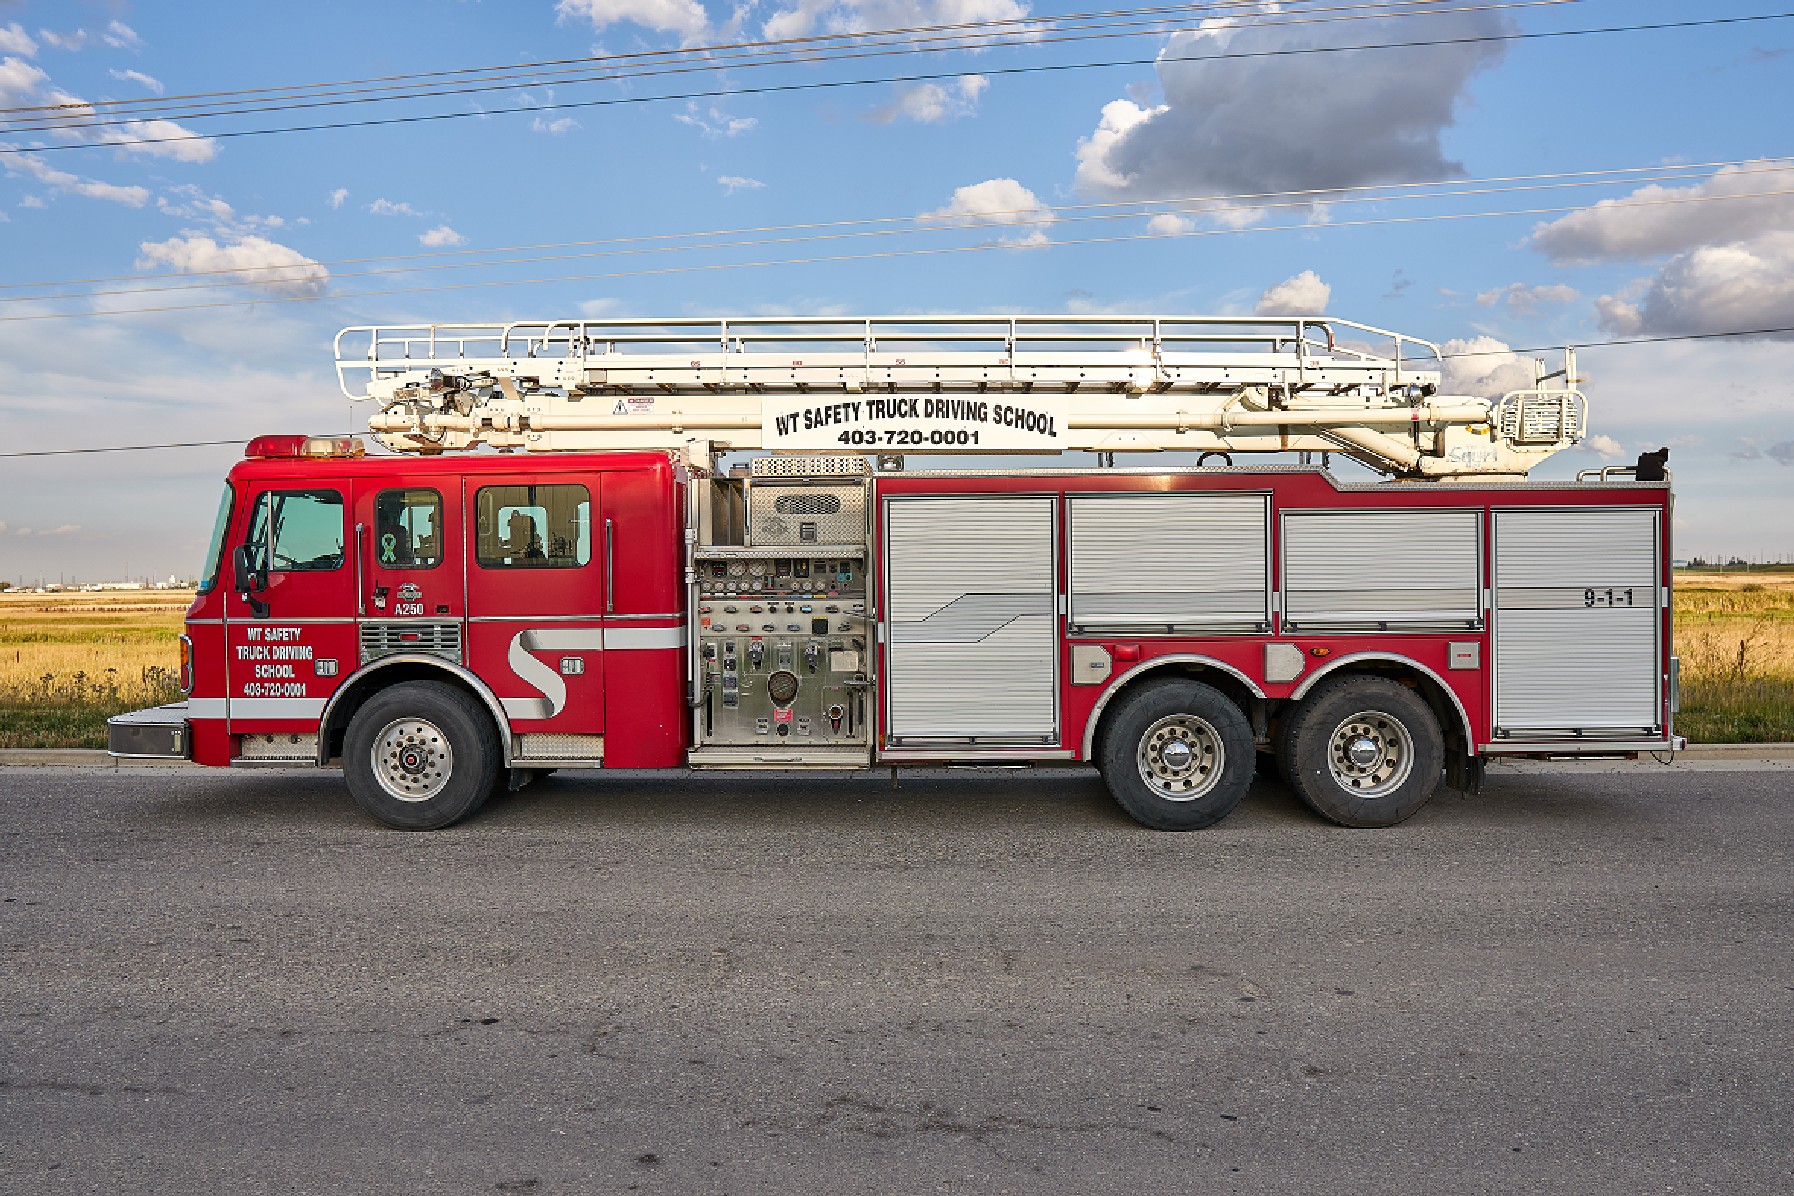 Fire Truck picture of Training vehicle.